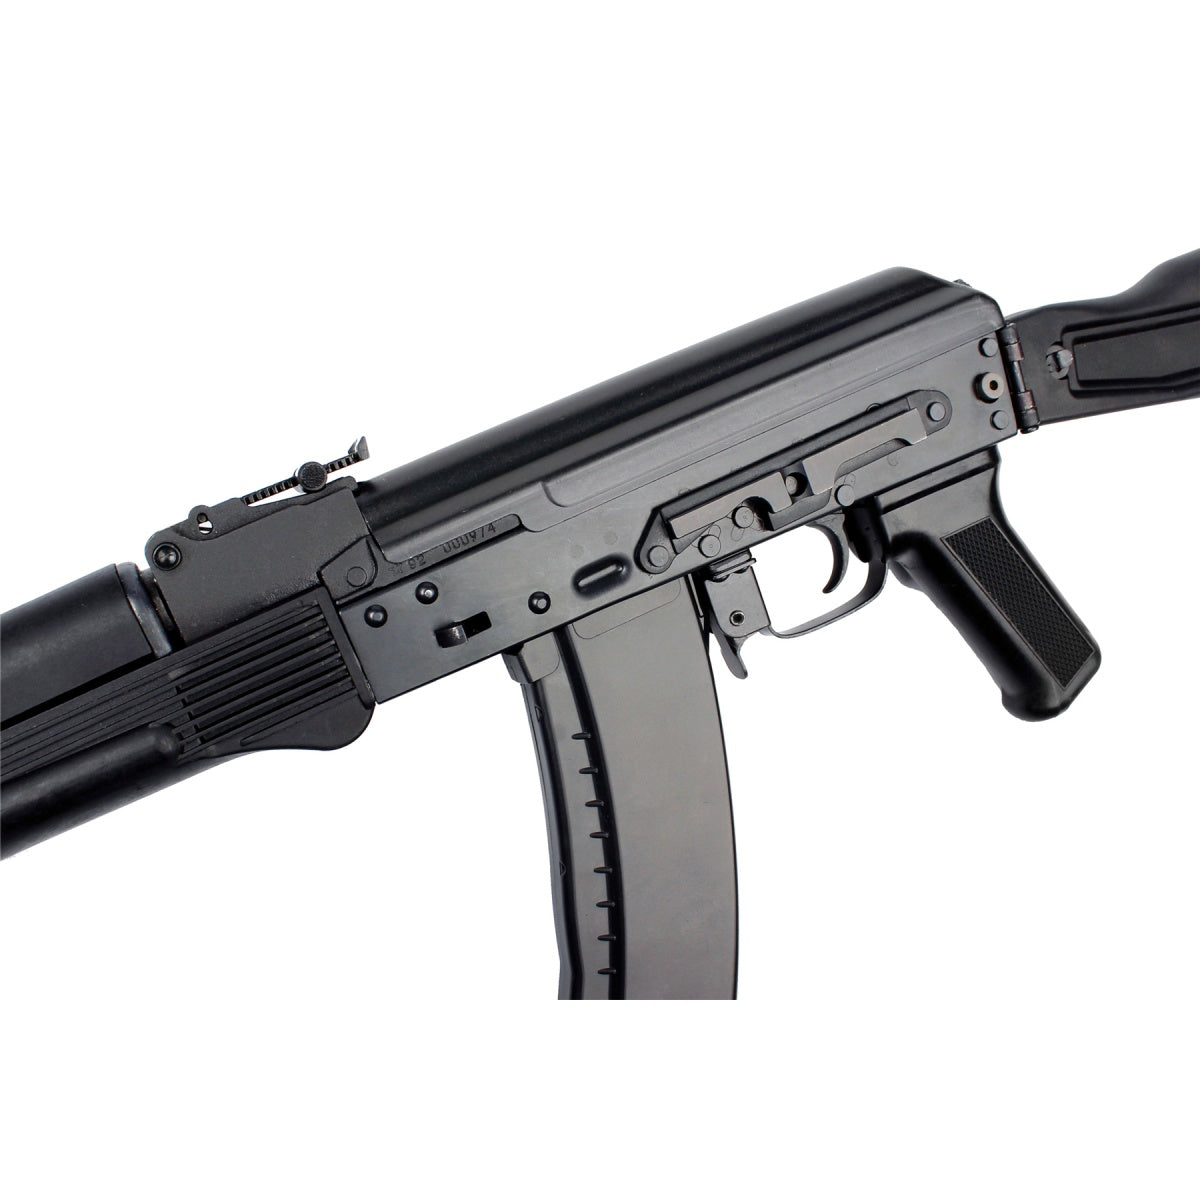 E&L AK74MN Essential Stamped Steel Airsoft AEG w/ Polymer Furniture (Color: Black) - ssairsoft